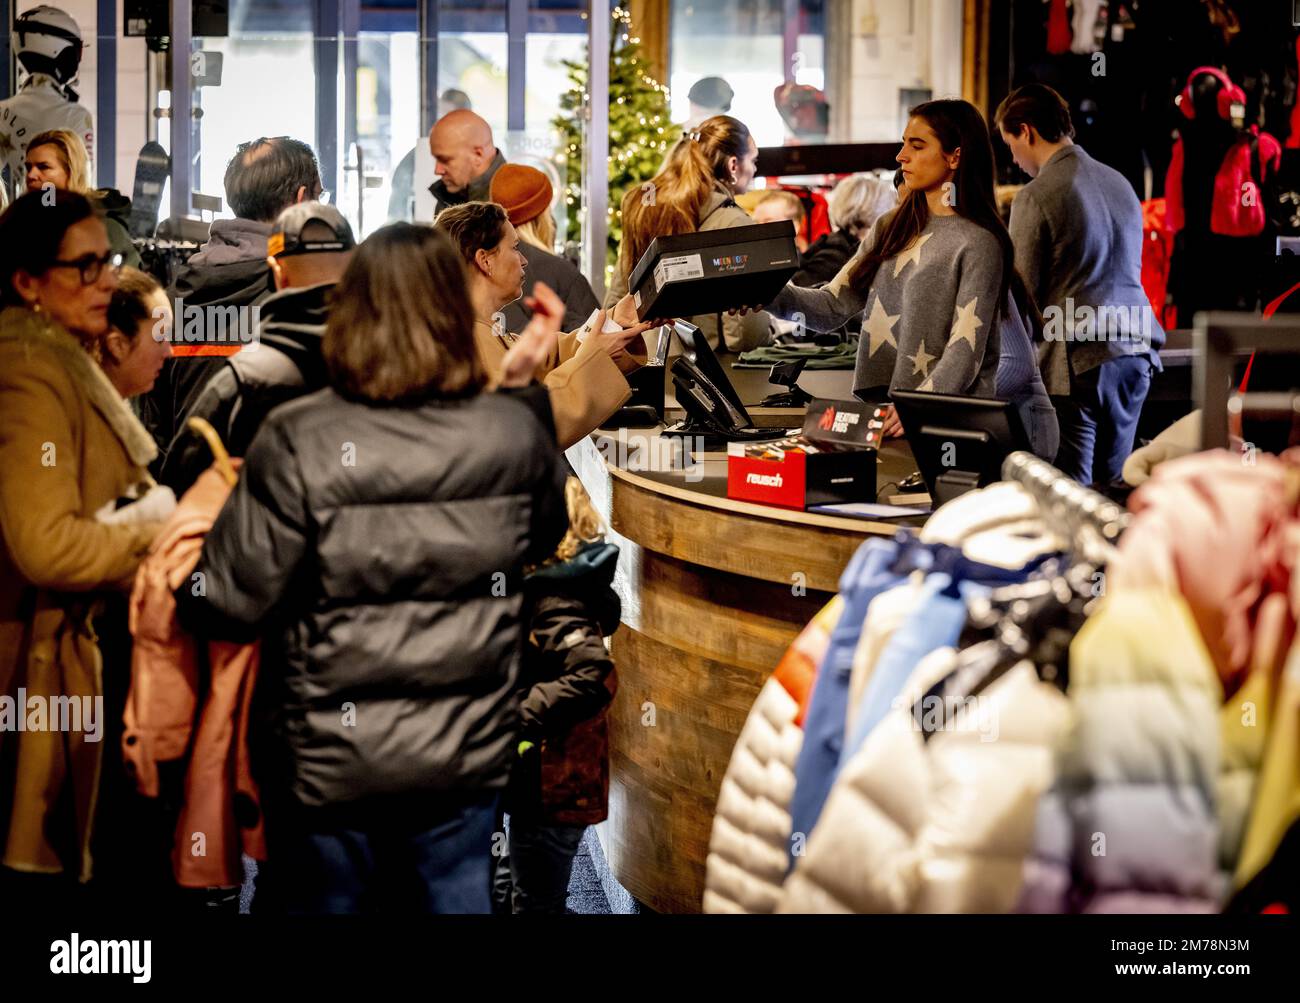 SCHEVENINGEN - Customers are queuing at the checkout of the Skihut store.  In the run-up to winter sports, there is a run for winter sports clothing  despite the less favorable weather conditions